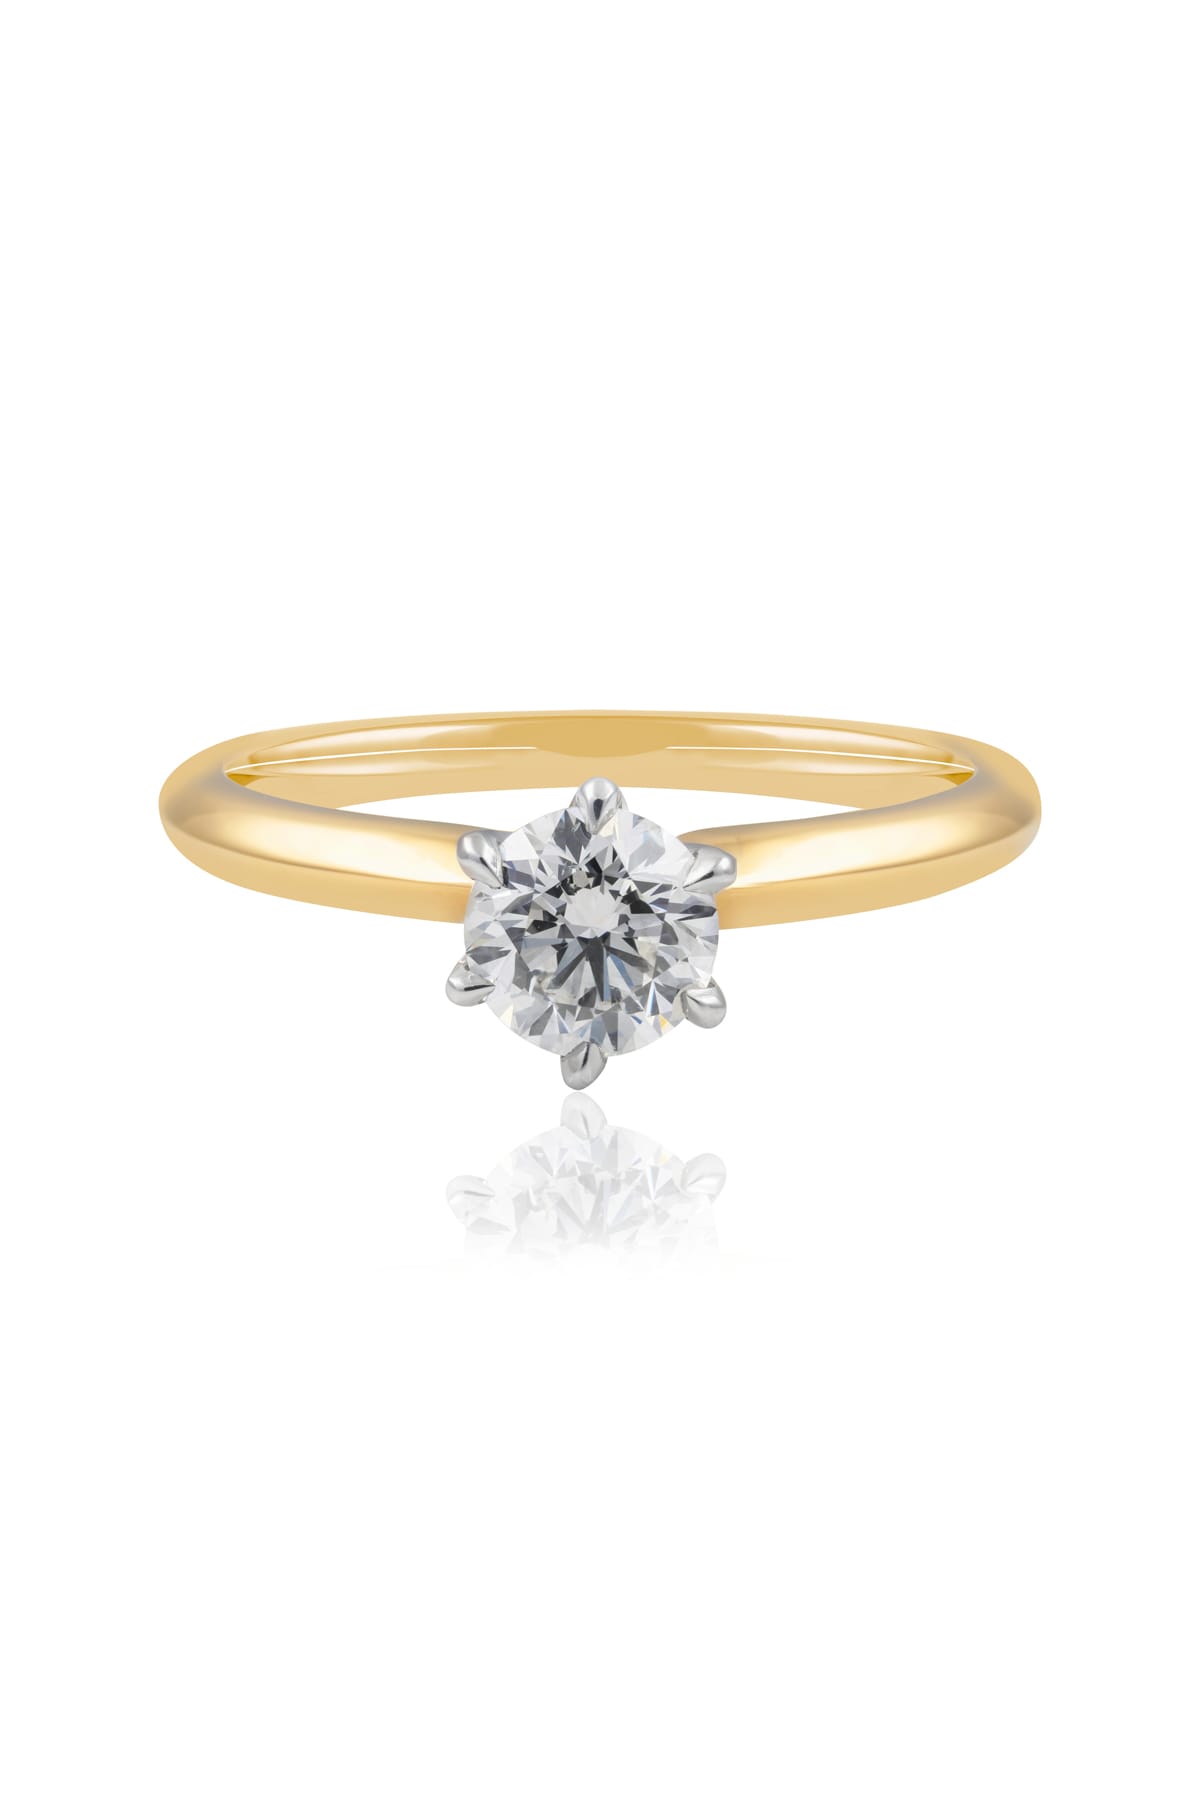 0.70ct Diamond Solitaire Engagement Ring With Knife Edge Setting In Yellow Gold from LeGassick